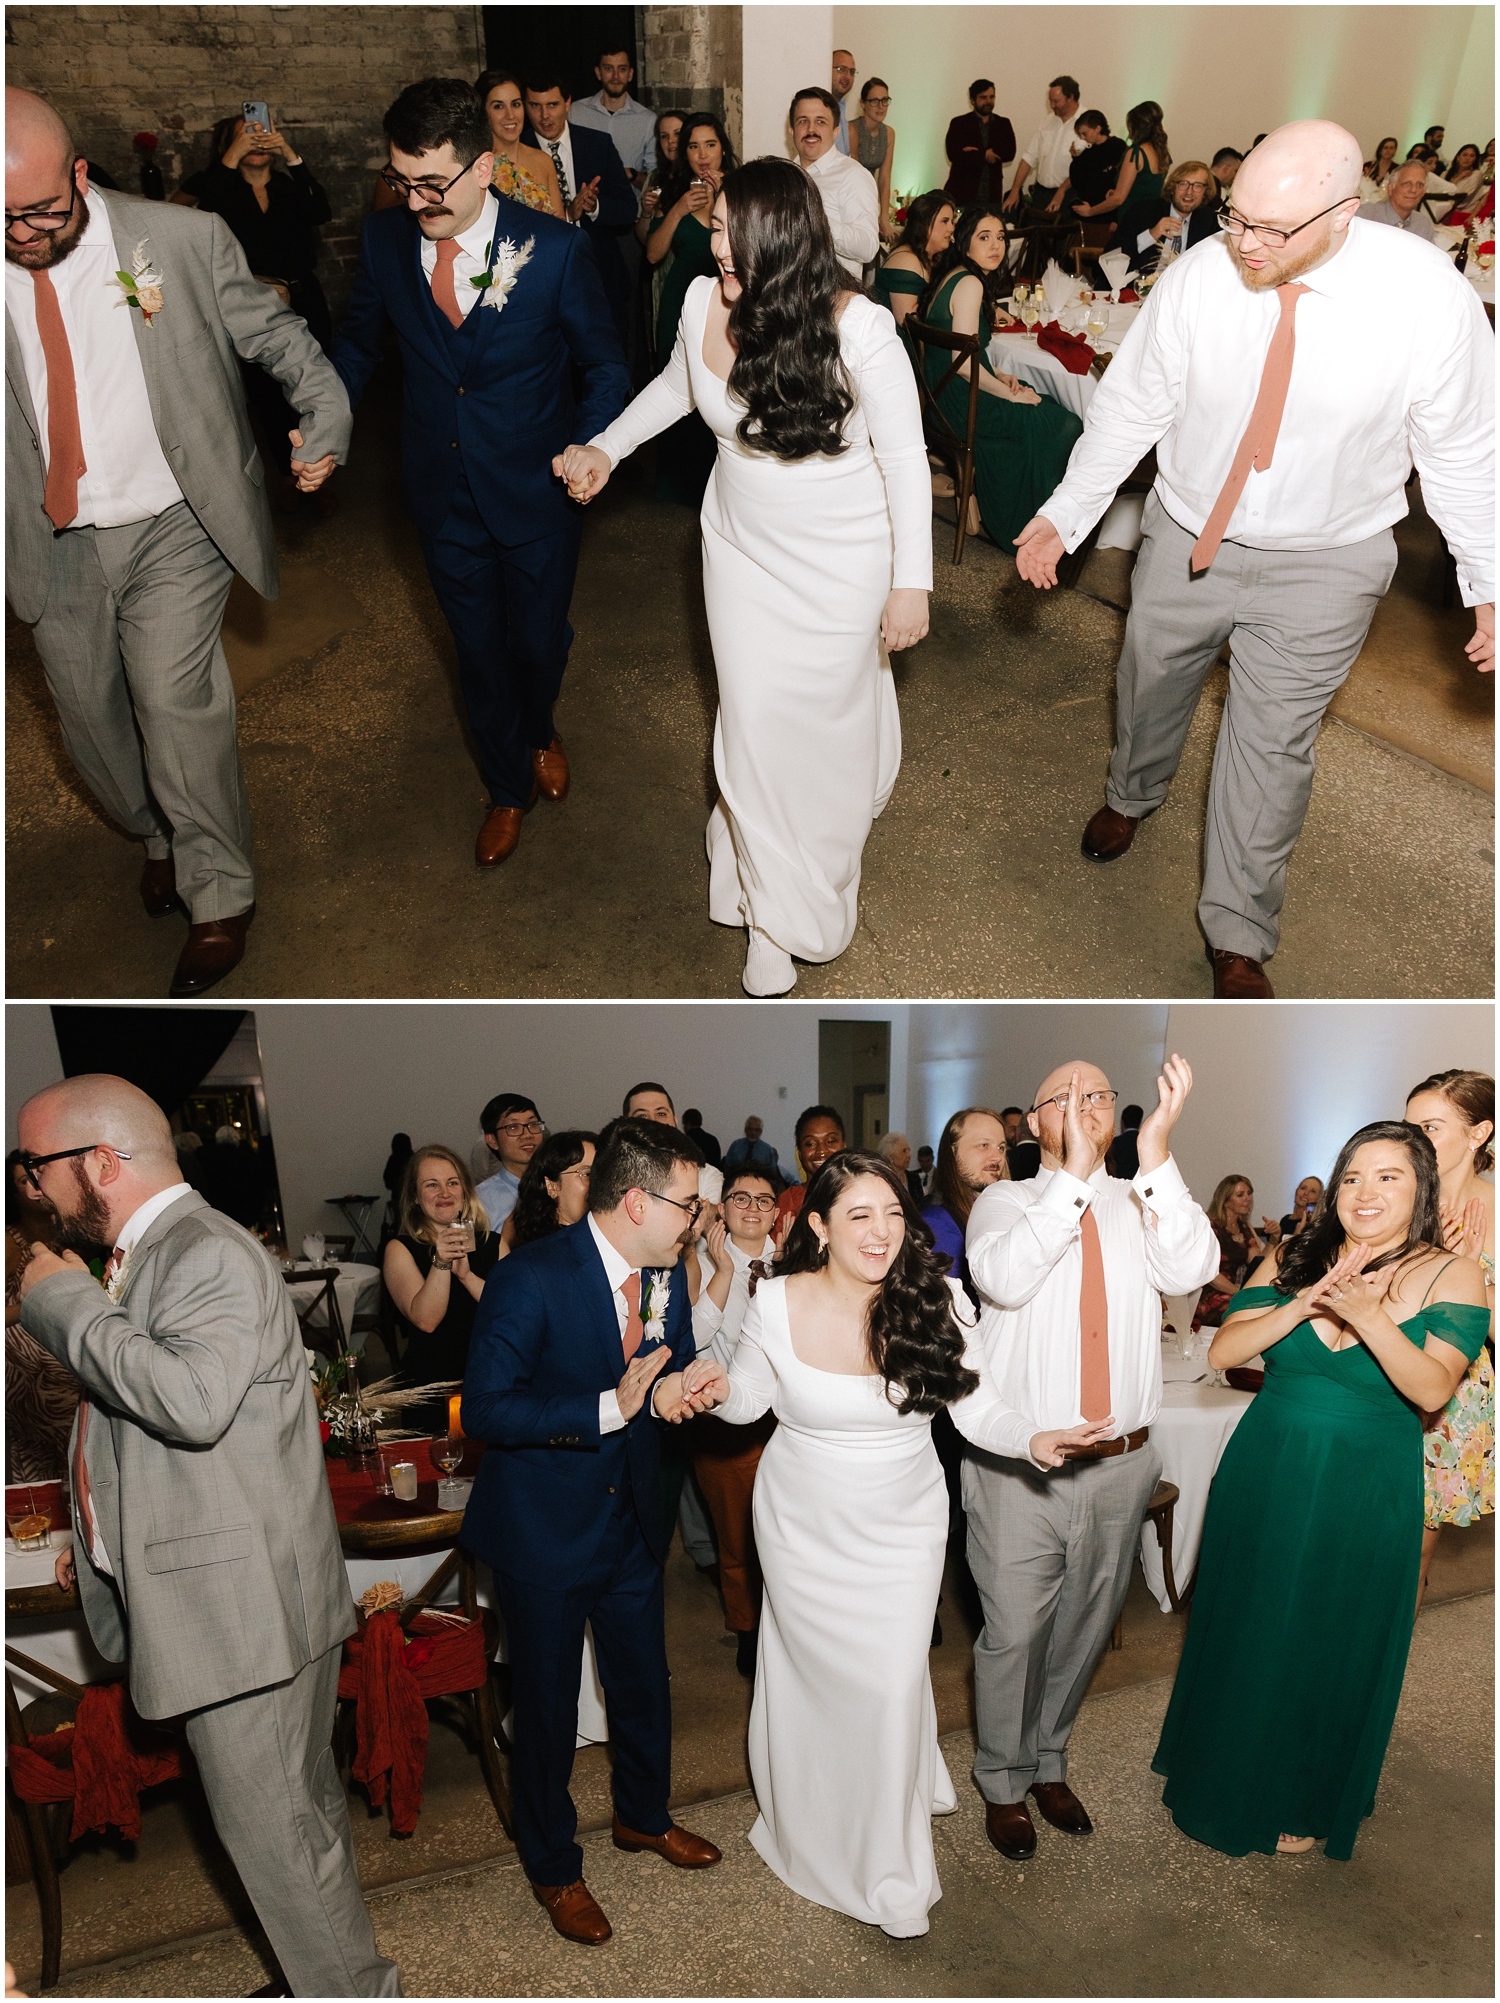 couple dances at their wedding reception in Tampa, FL at The Rialto Theatre